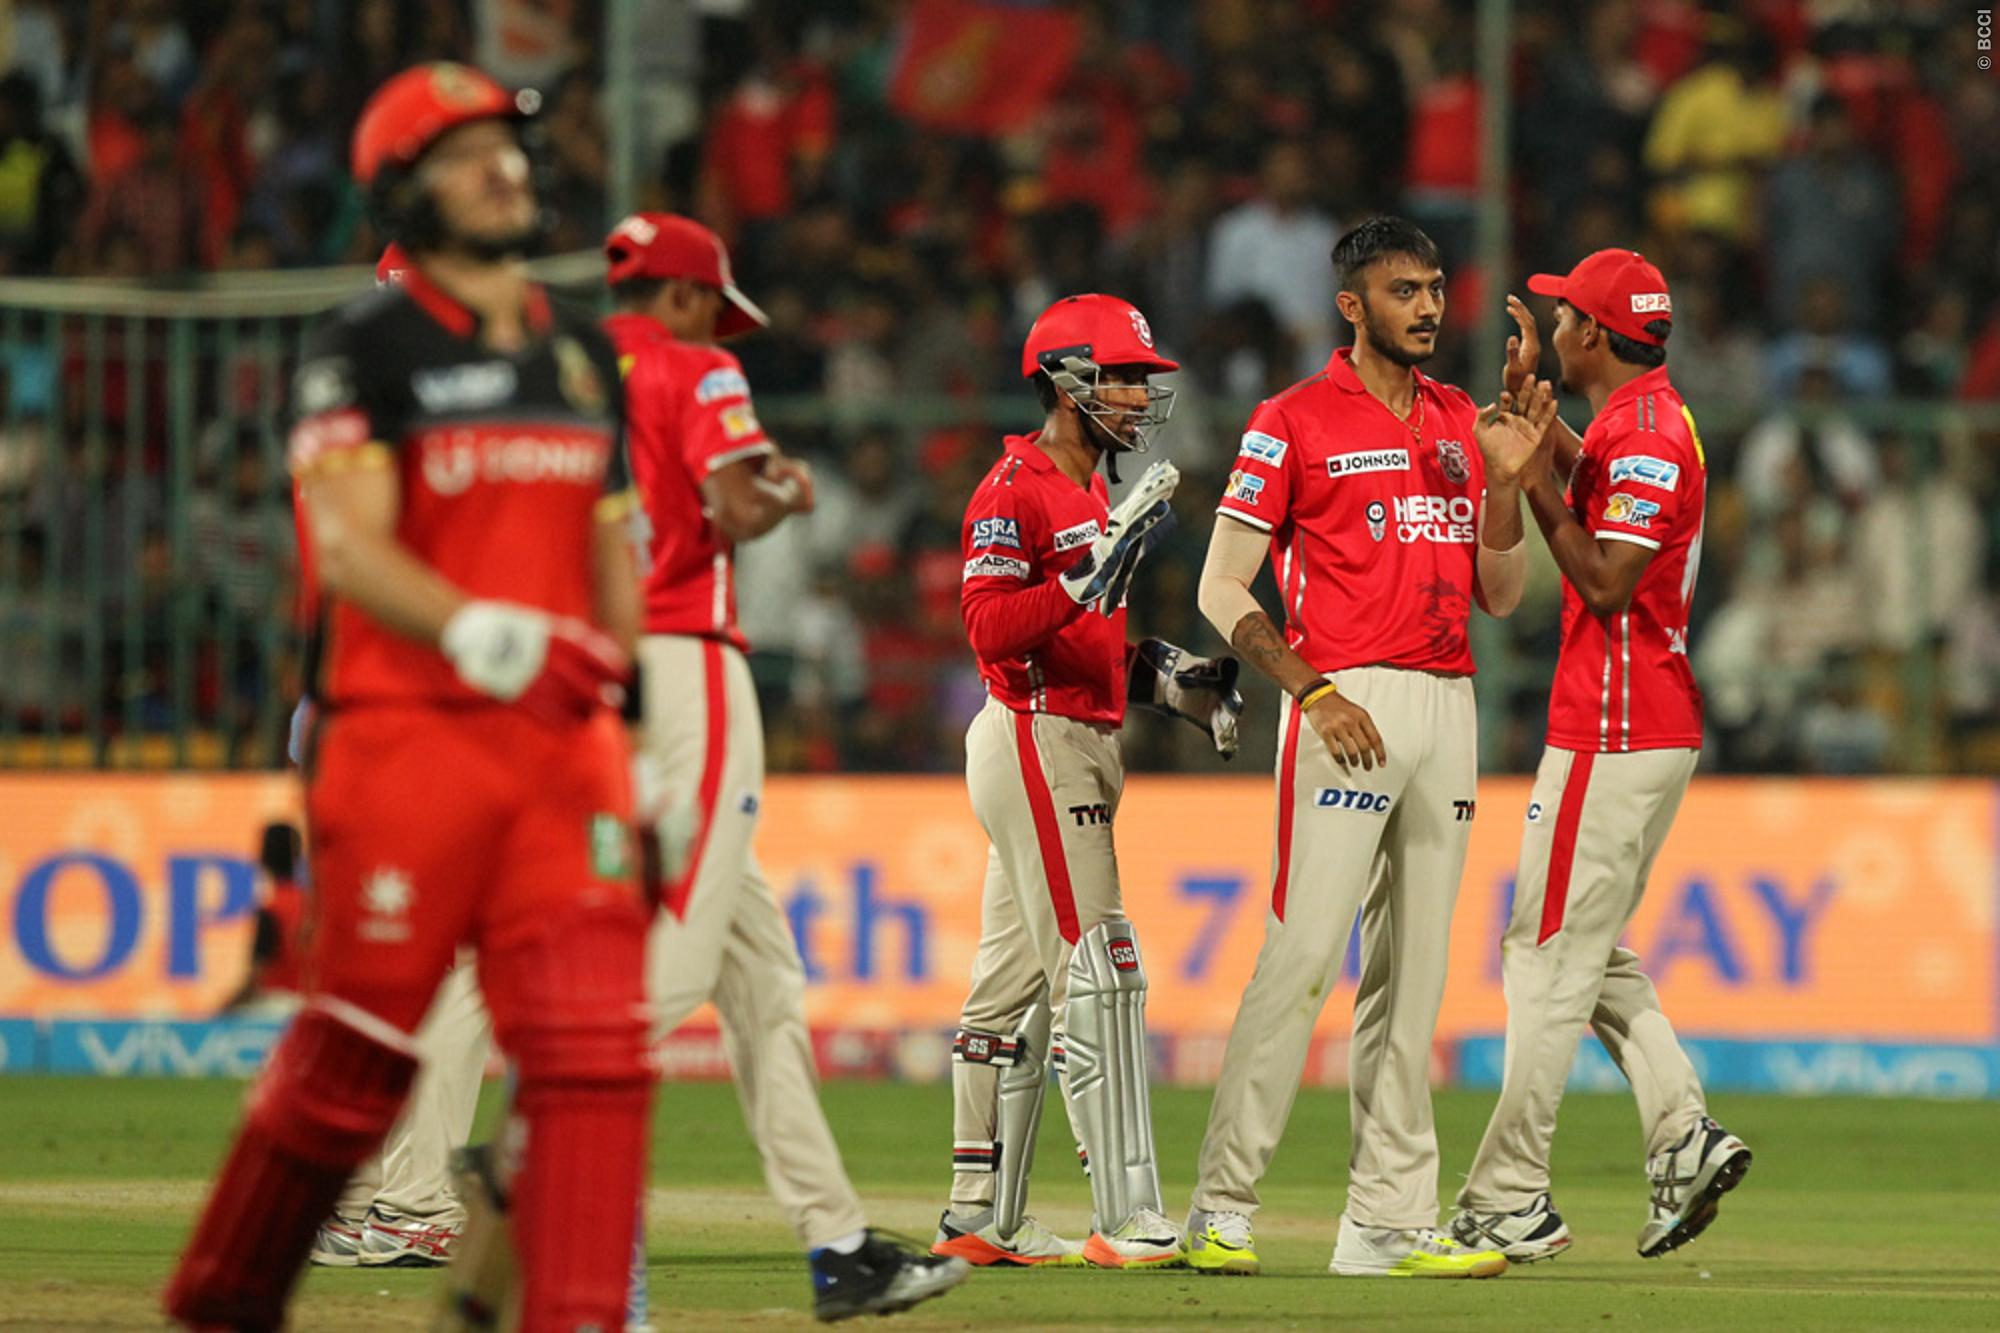 IPL 2017 | Kings XI Punjab bag win after yet another RCB collapse